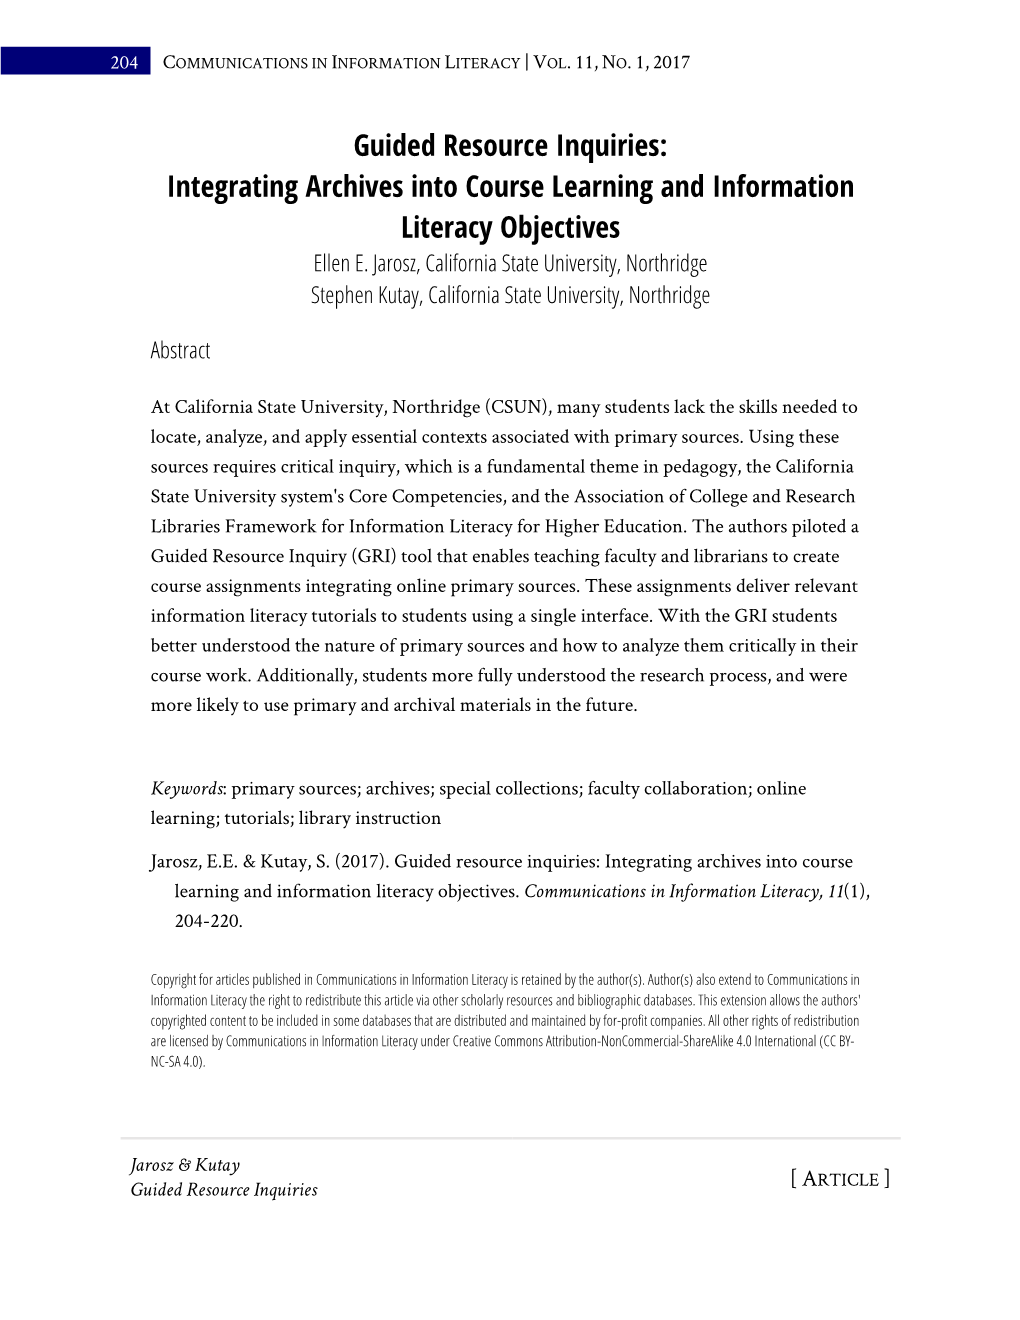 Integrating Archives Into Course Learning and Information Literacy Objectives Ellen E